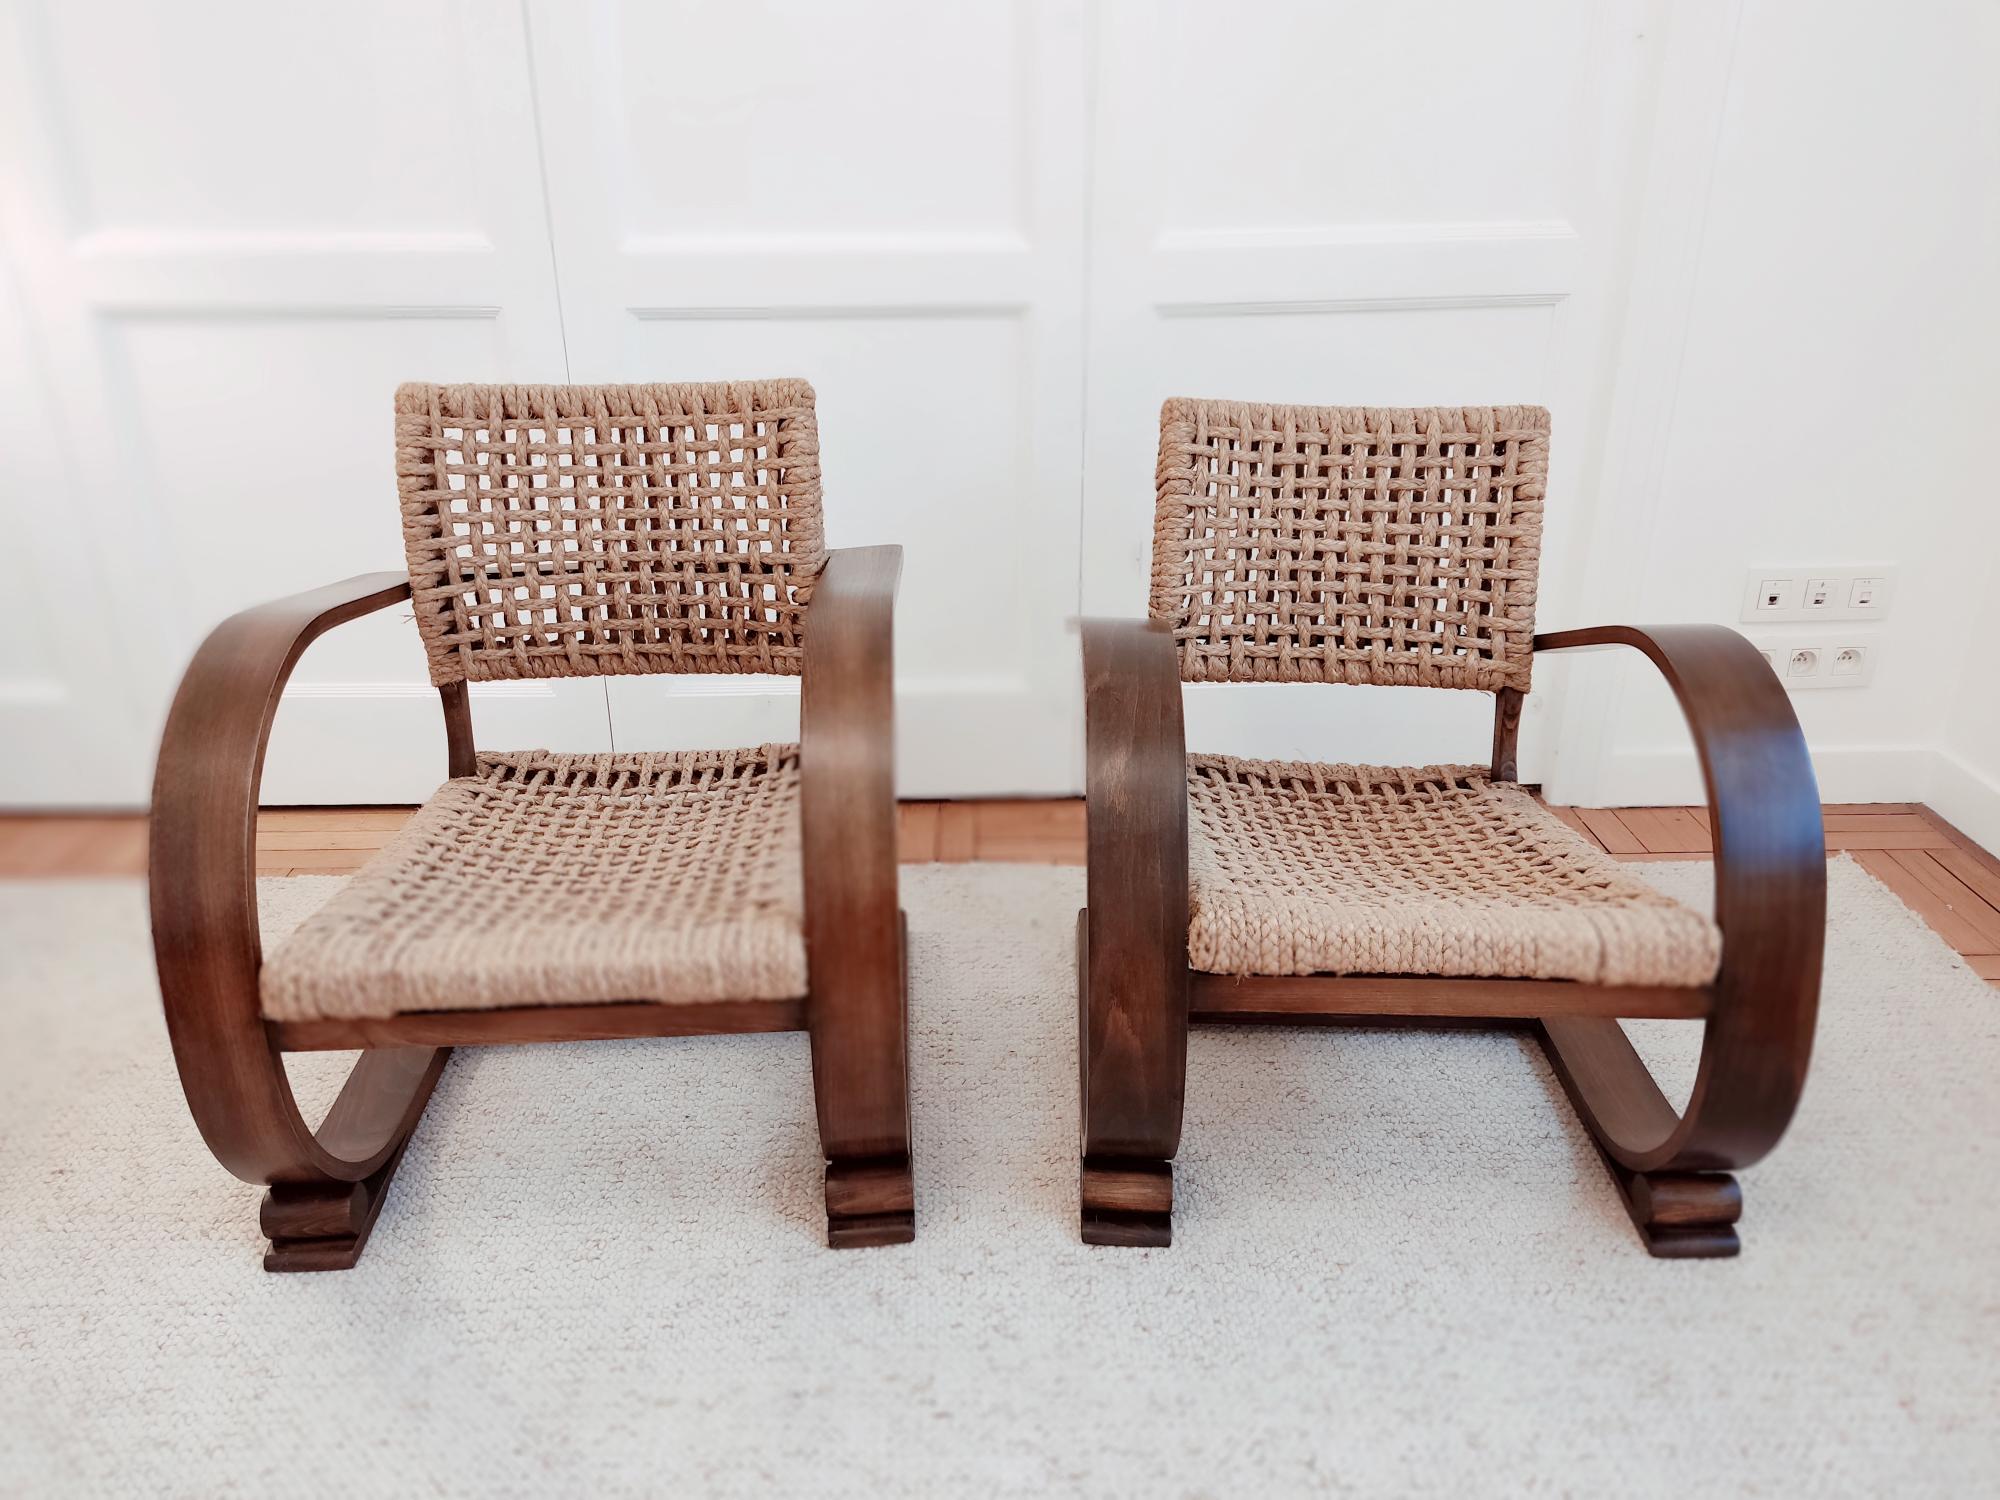 Audoux & Minet Rope Chairs